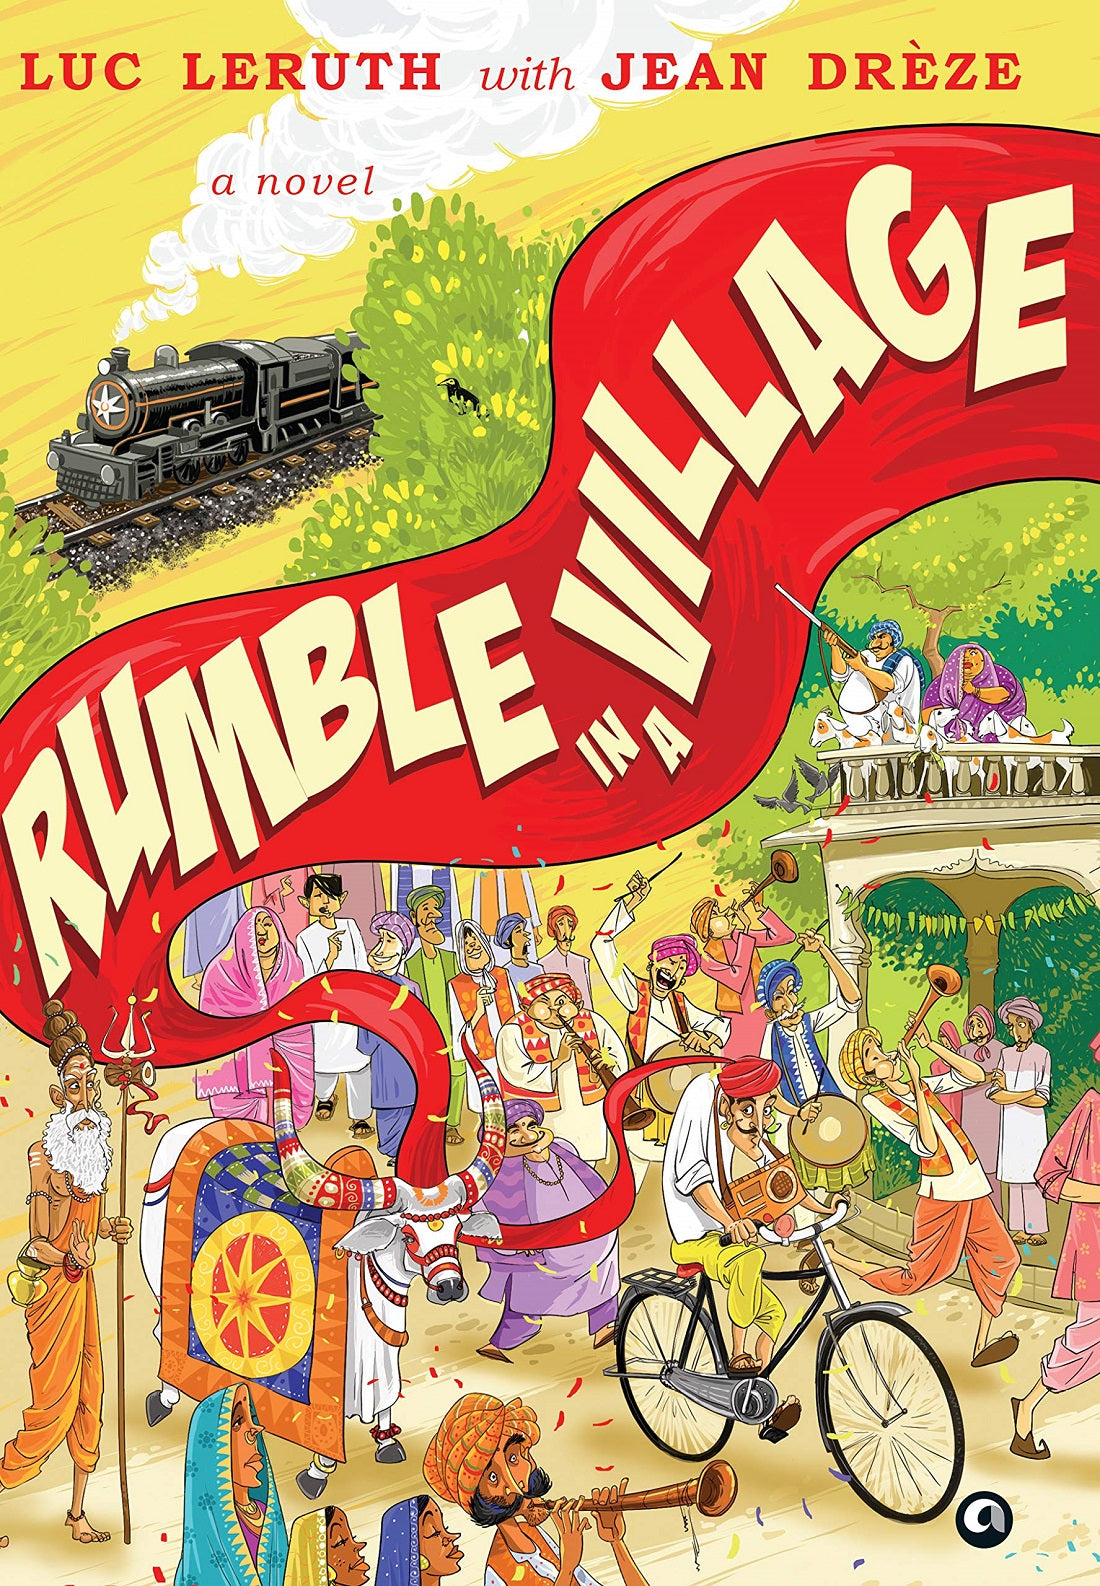 RUMBLE IN A VILLAGE